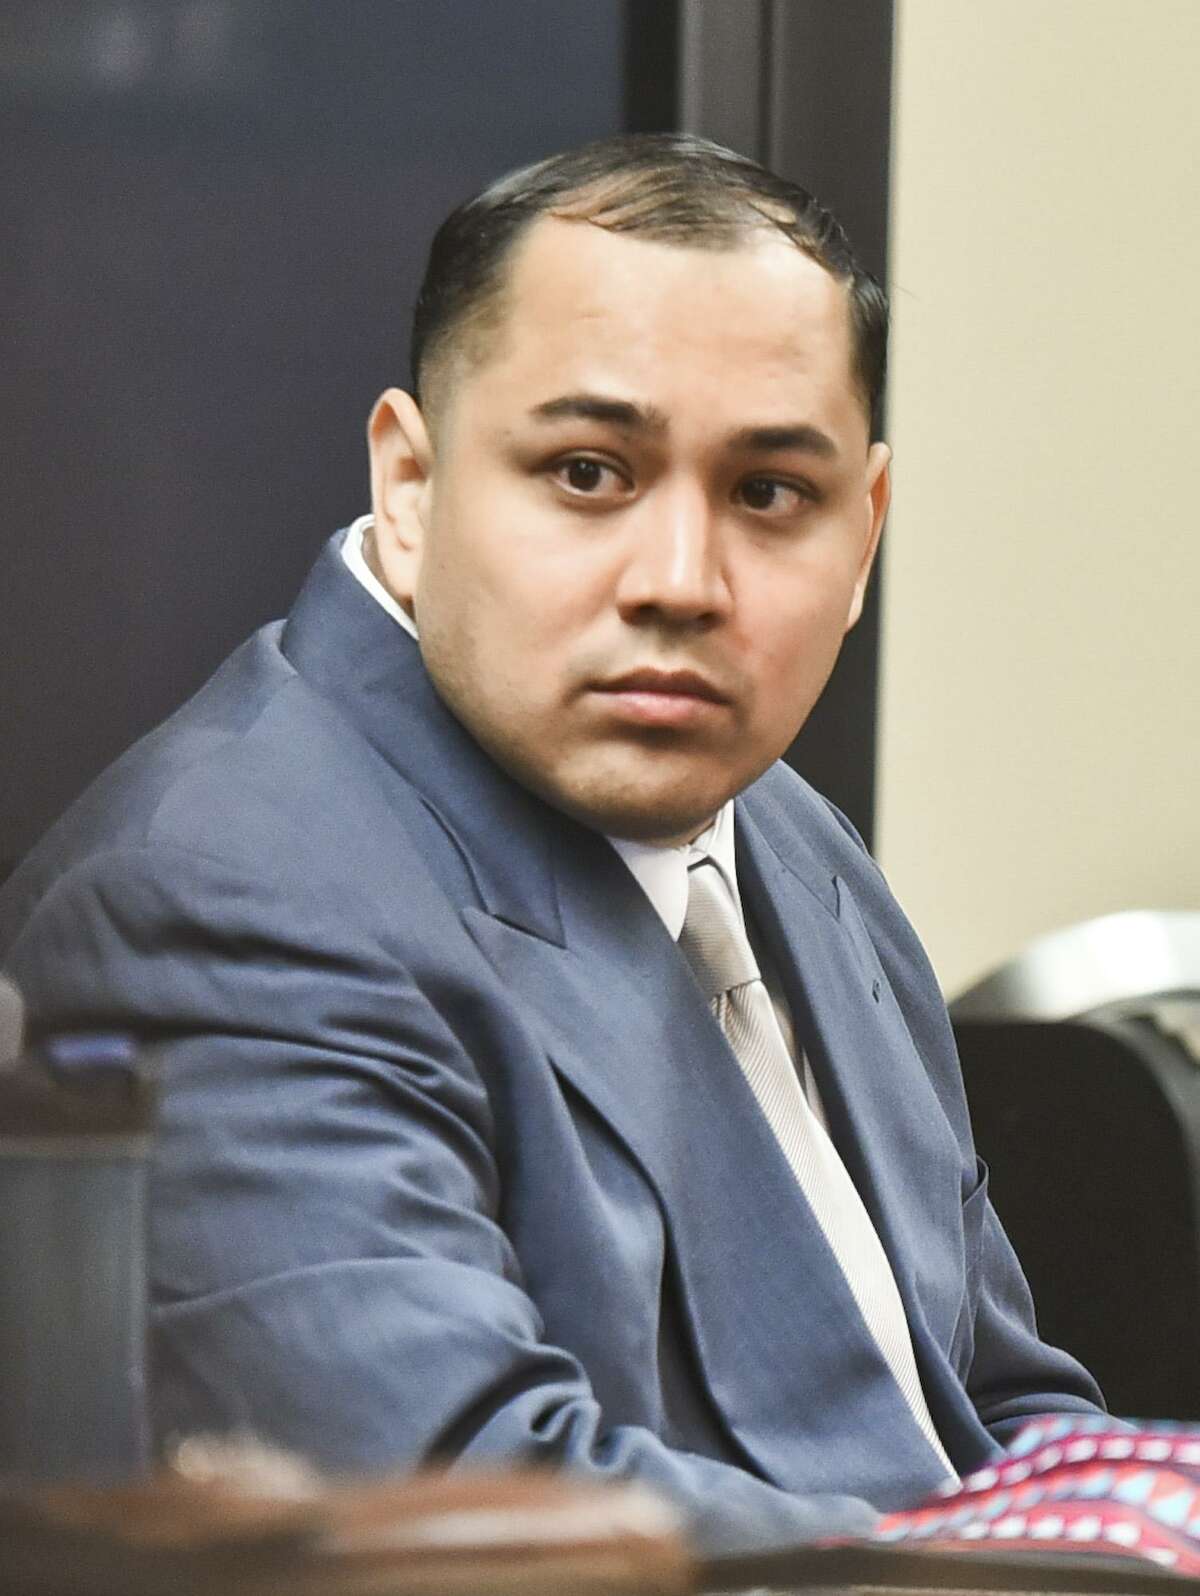 Cristian Yepez waits at the 406th District Courtroom as the defense and prosecution present opening arguments to Judge Oscar Hale on Tuesday, May 16, 2017.